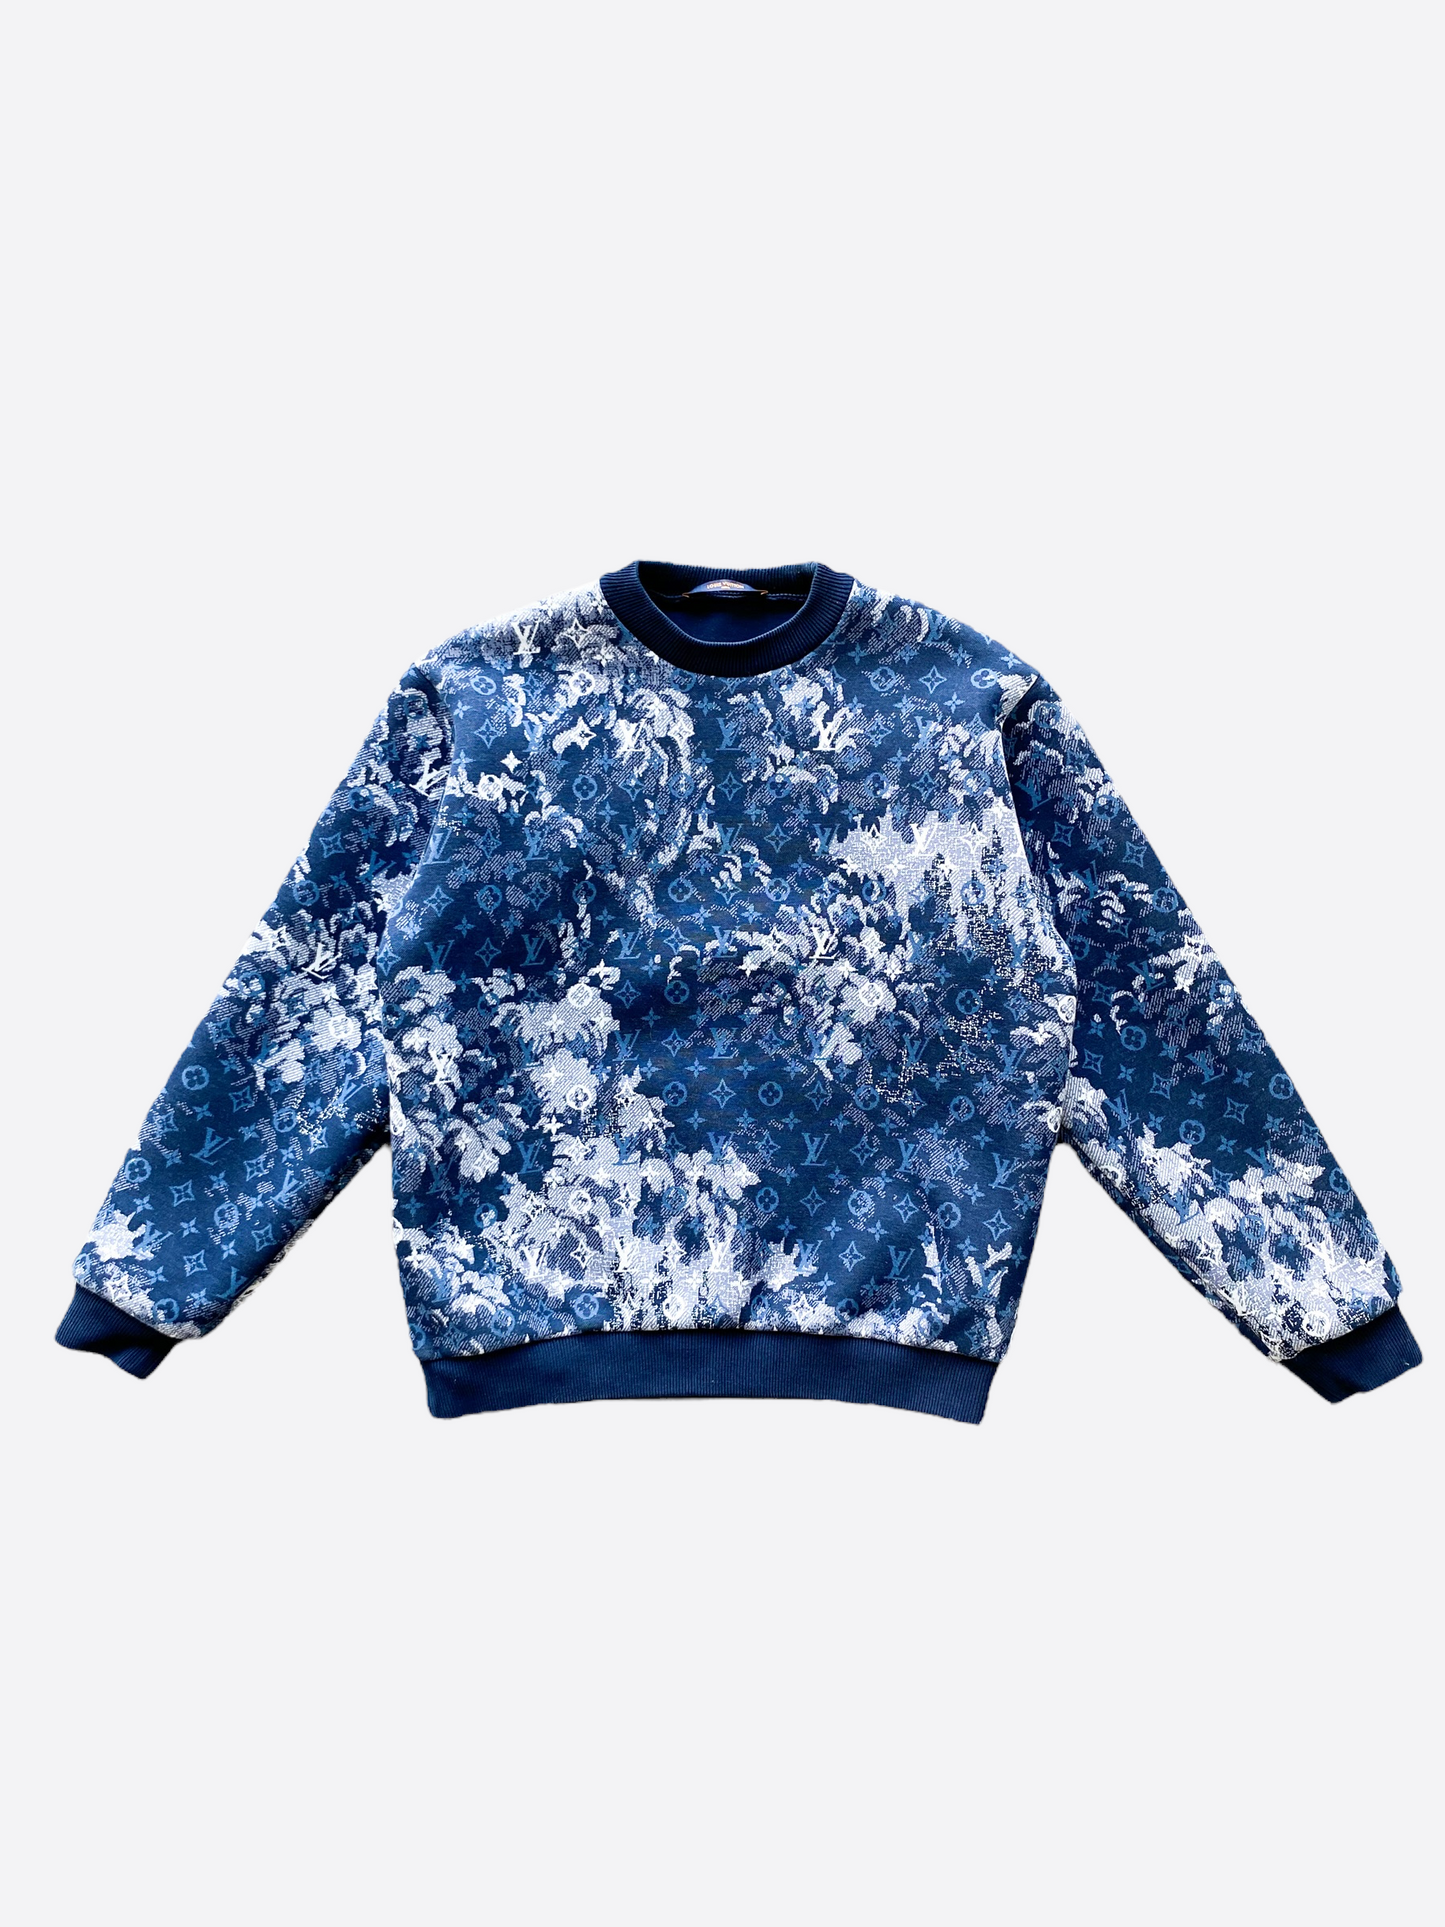 Louis Vuitton Tapestry Sweater - Size M – CnExclusives